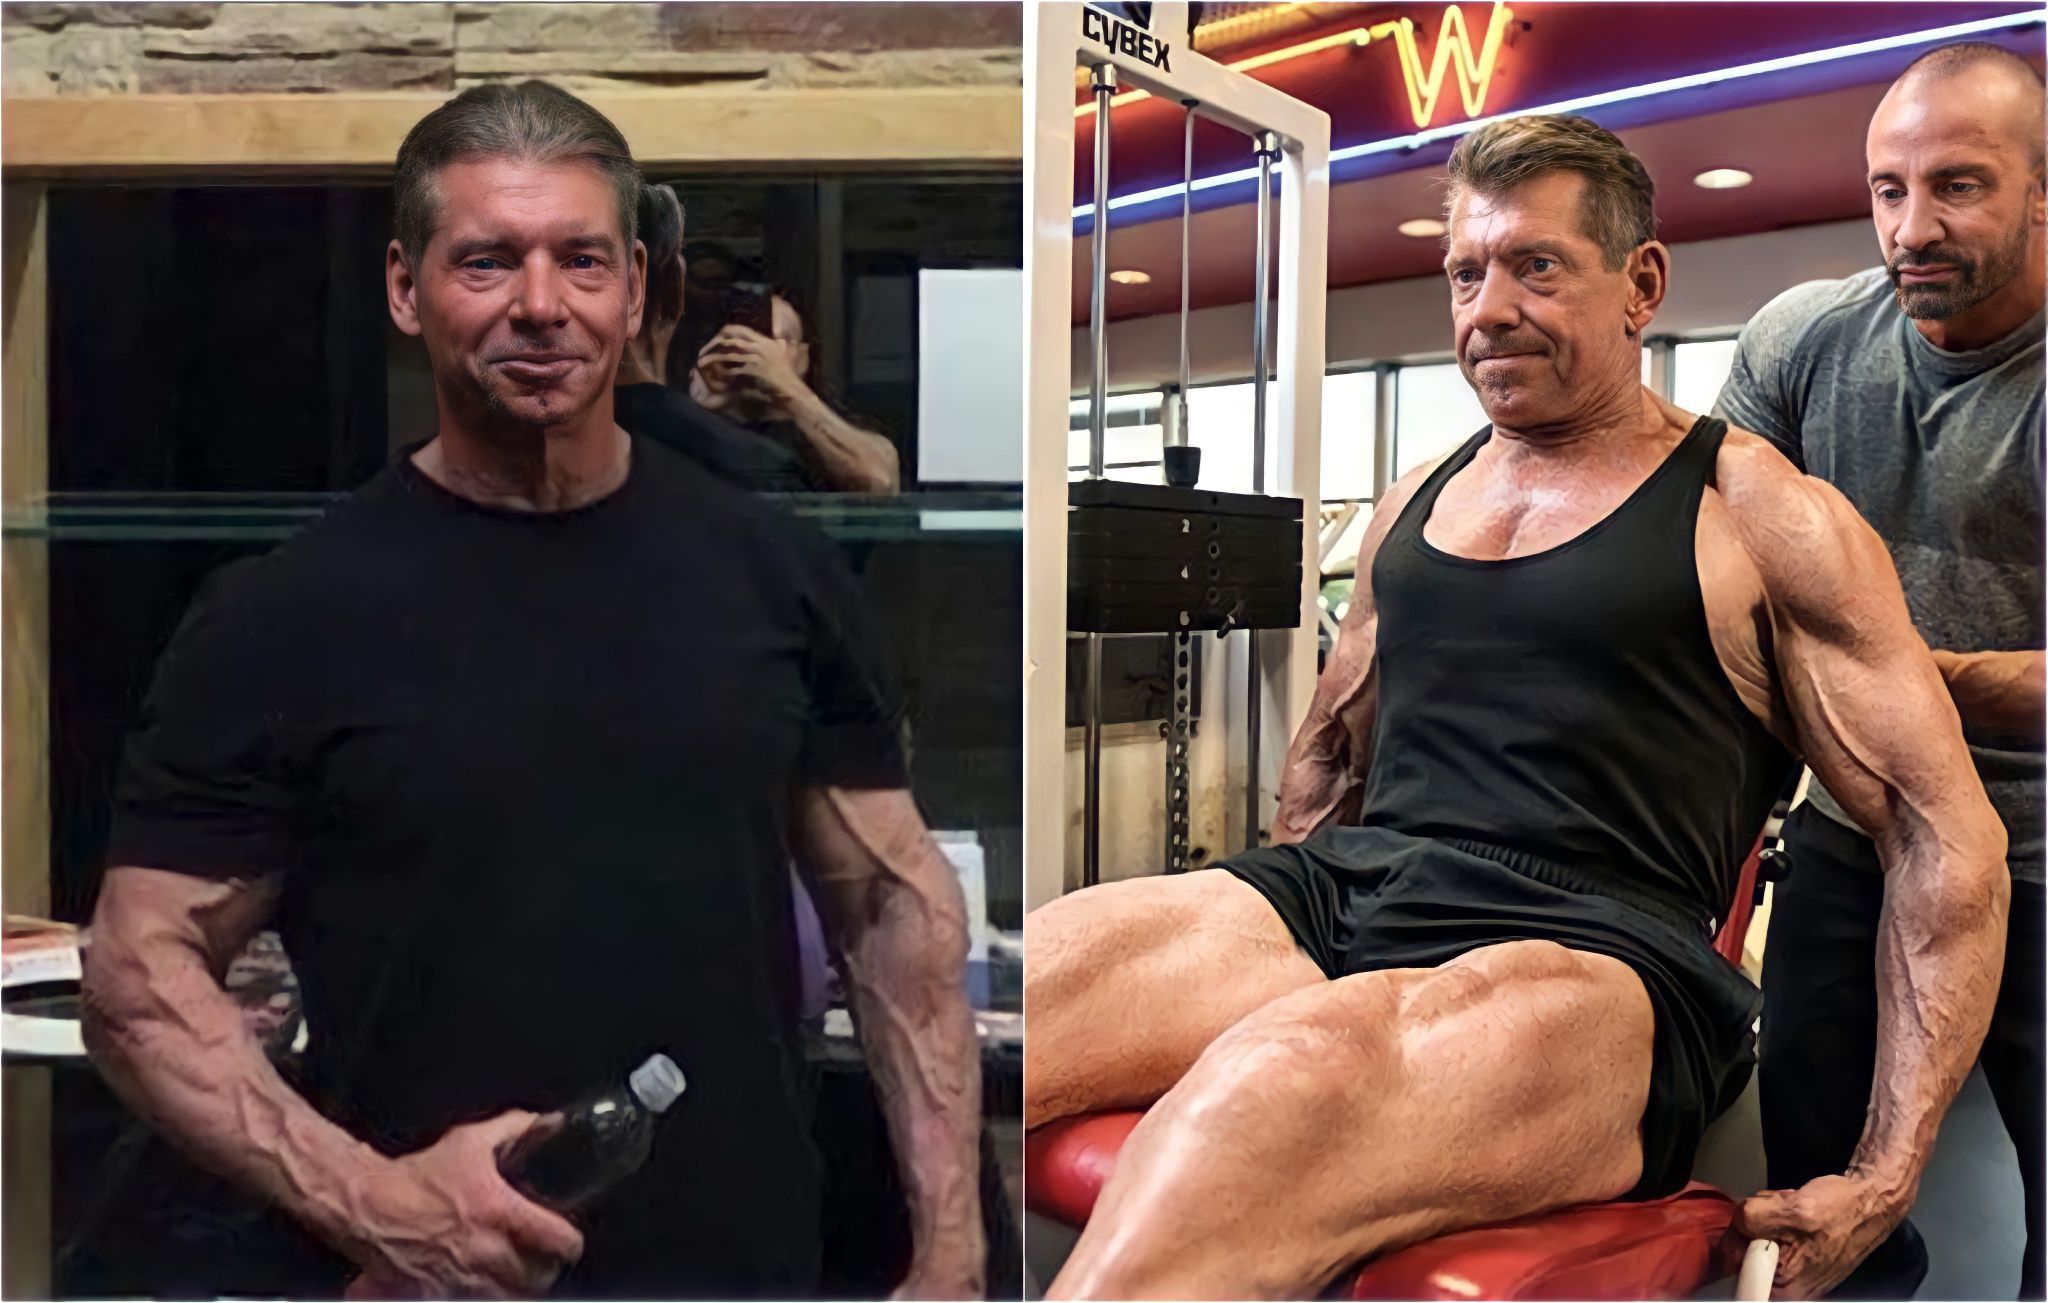 Vince McMahon: Training photo shows WWE Chairman is still jacked